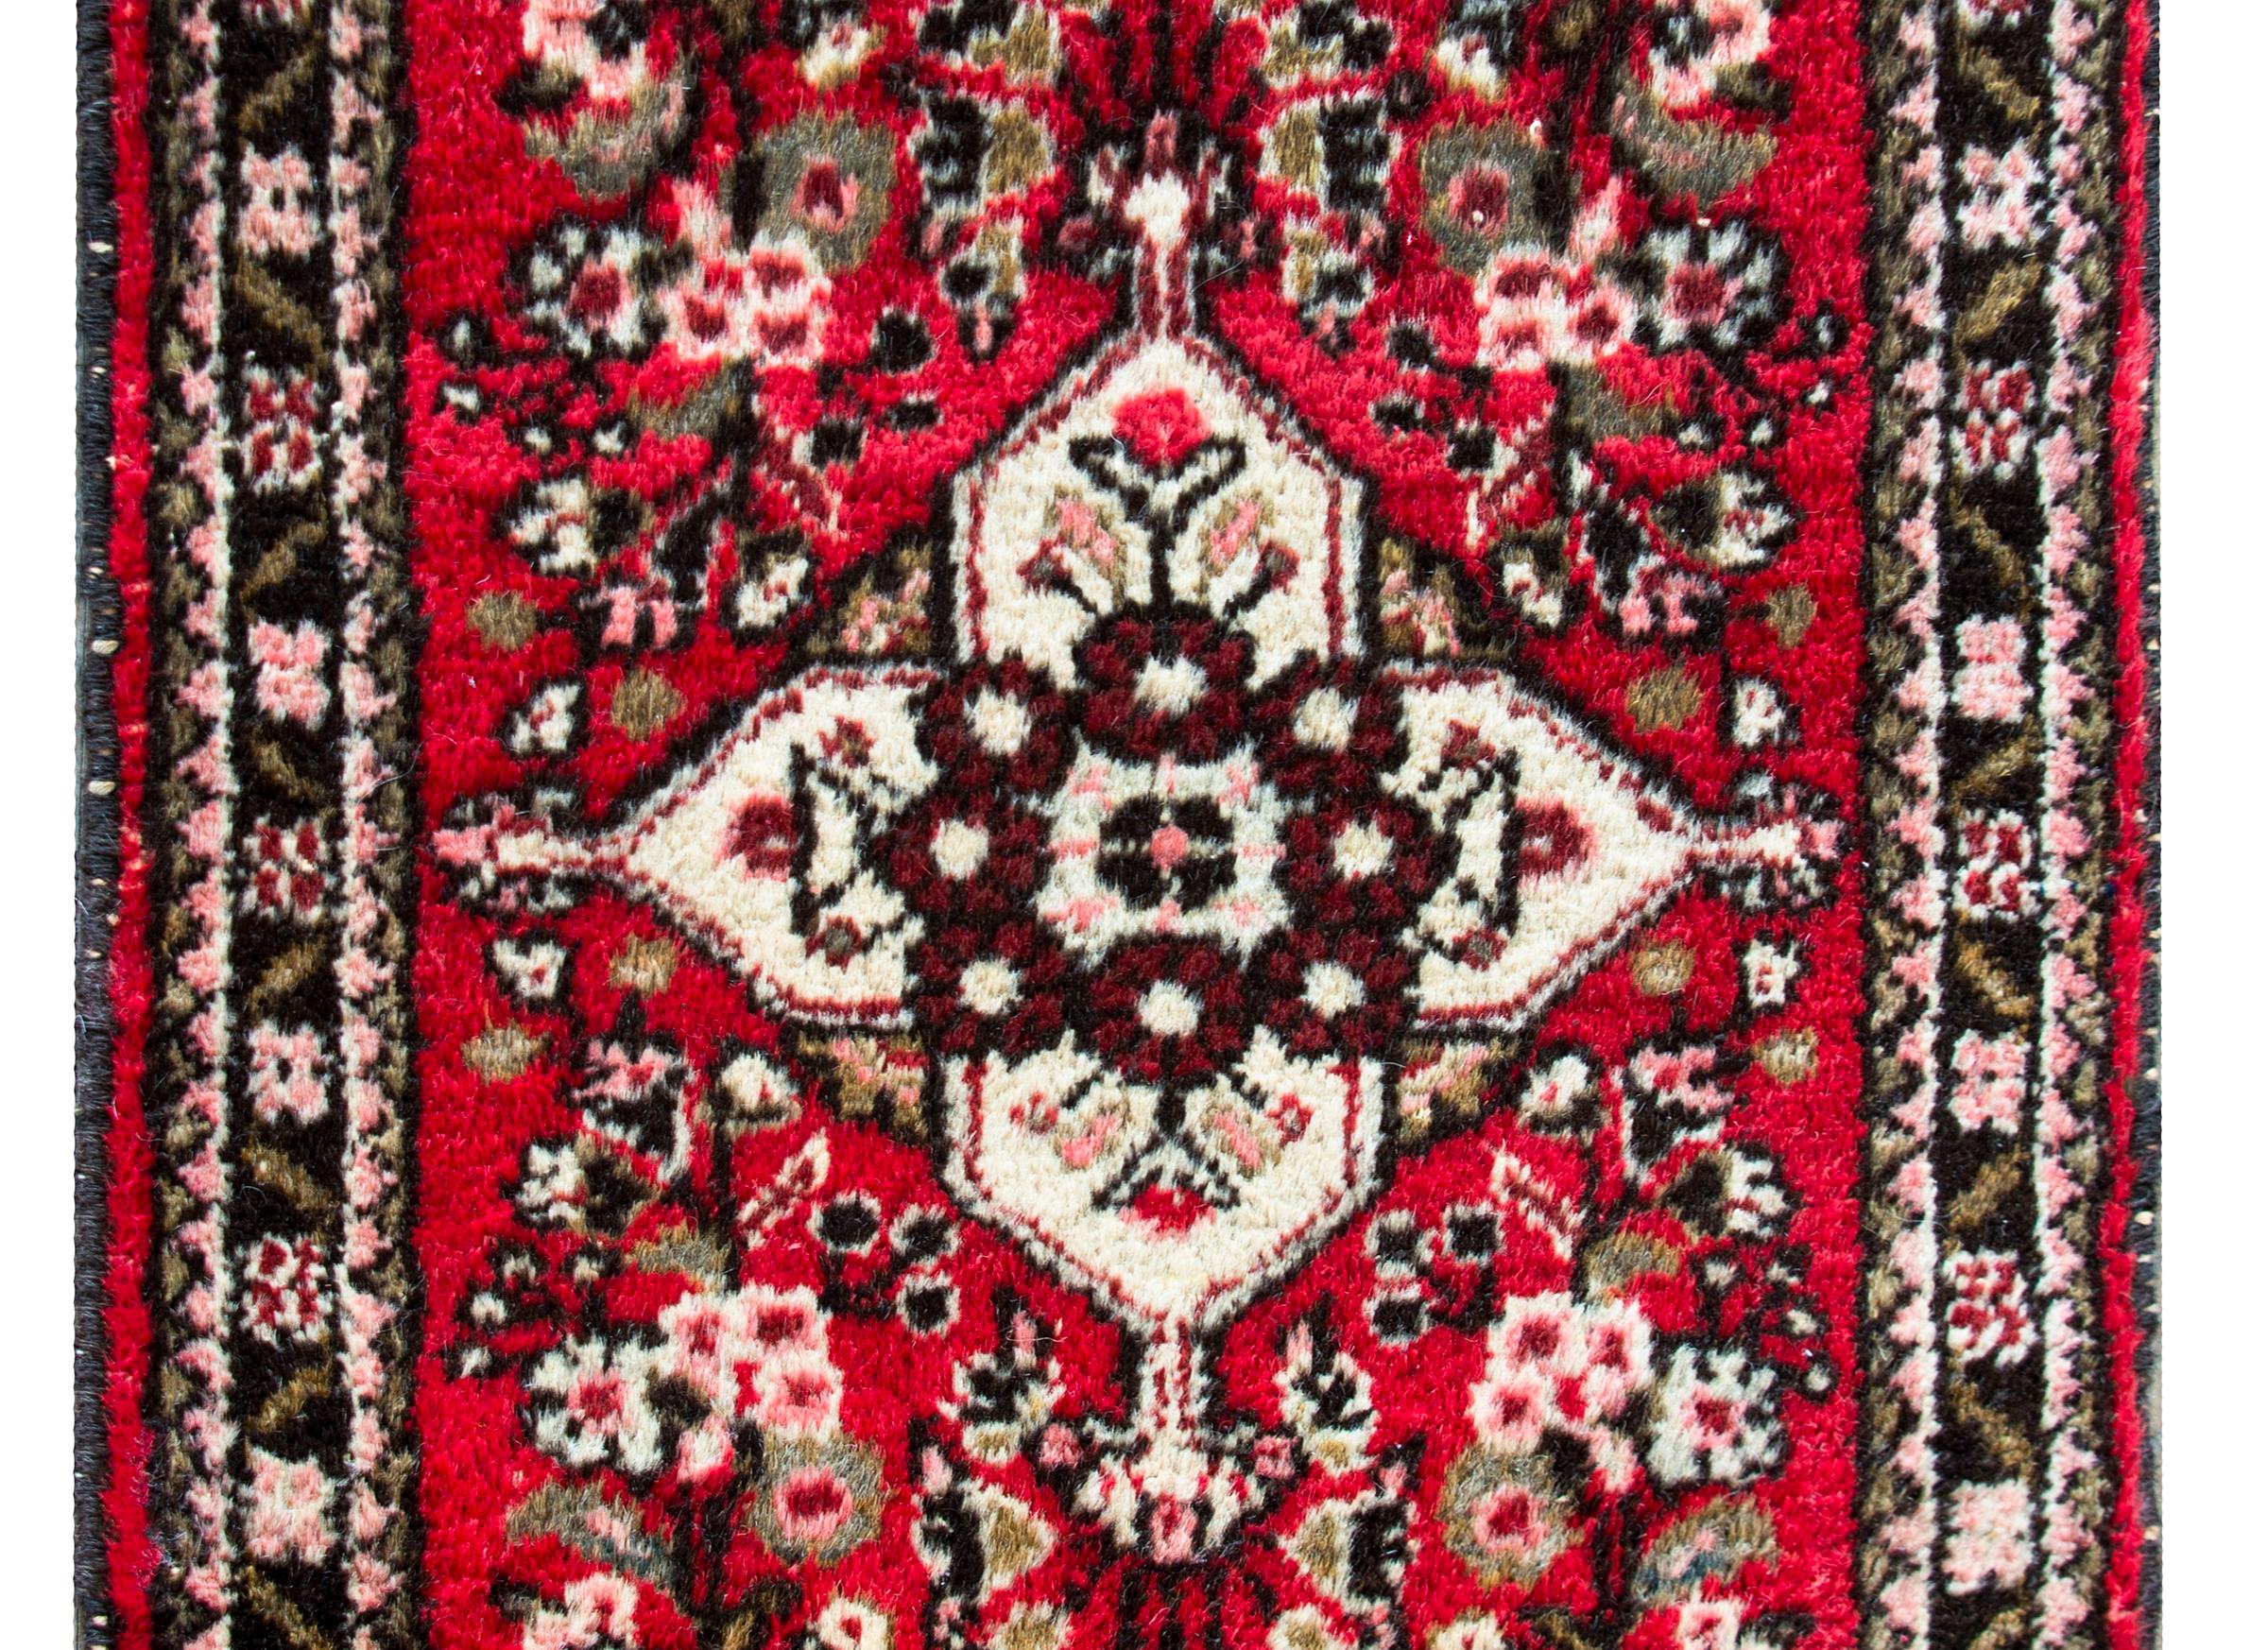 A sweet mid-20th century Persian Hamadan rug with a central floral medallion living amidst a densely woven field of more flowers, all woven in pinks, white, black, and taupe on a cranberry background, and surrounded by a border with petite floral